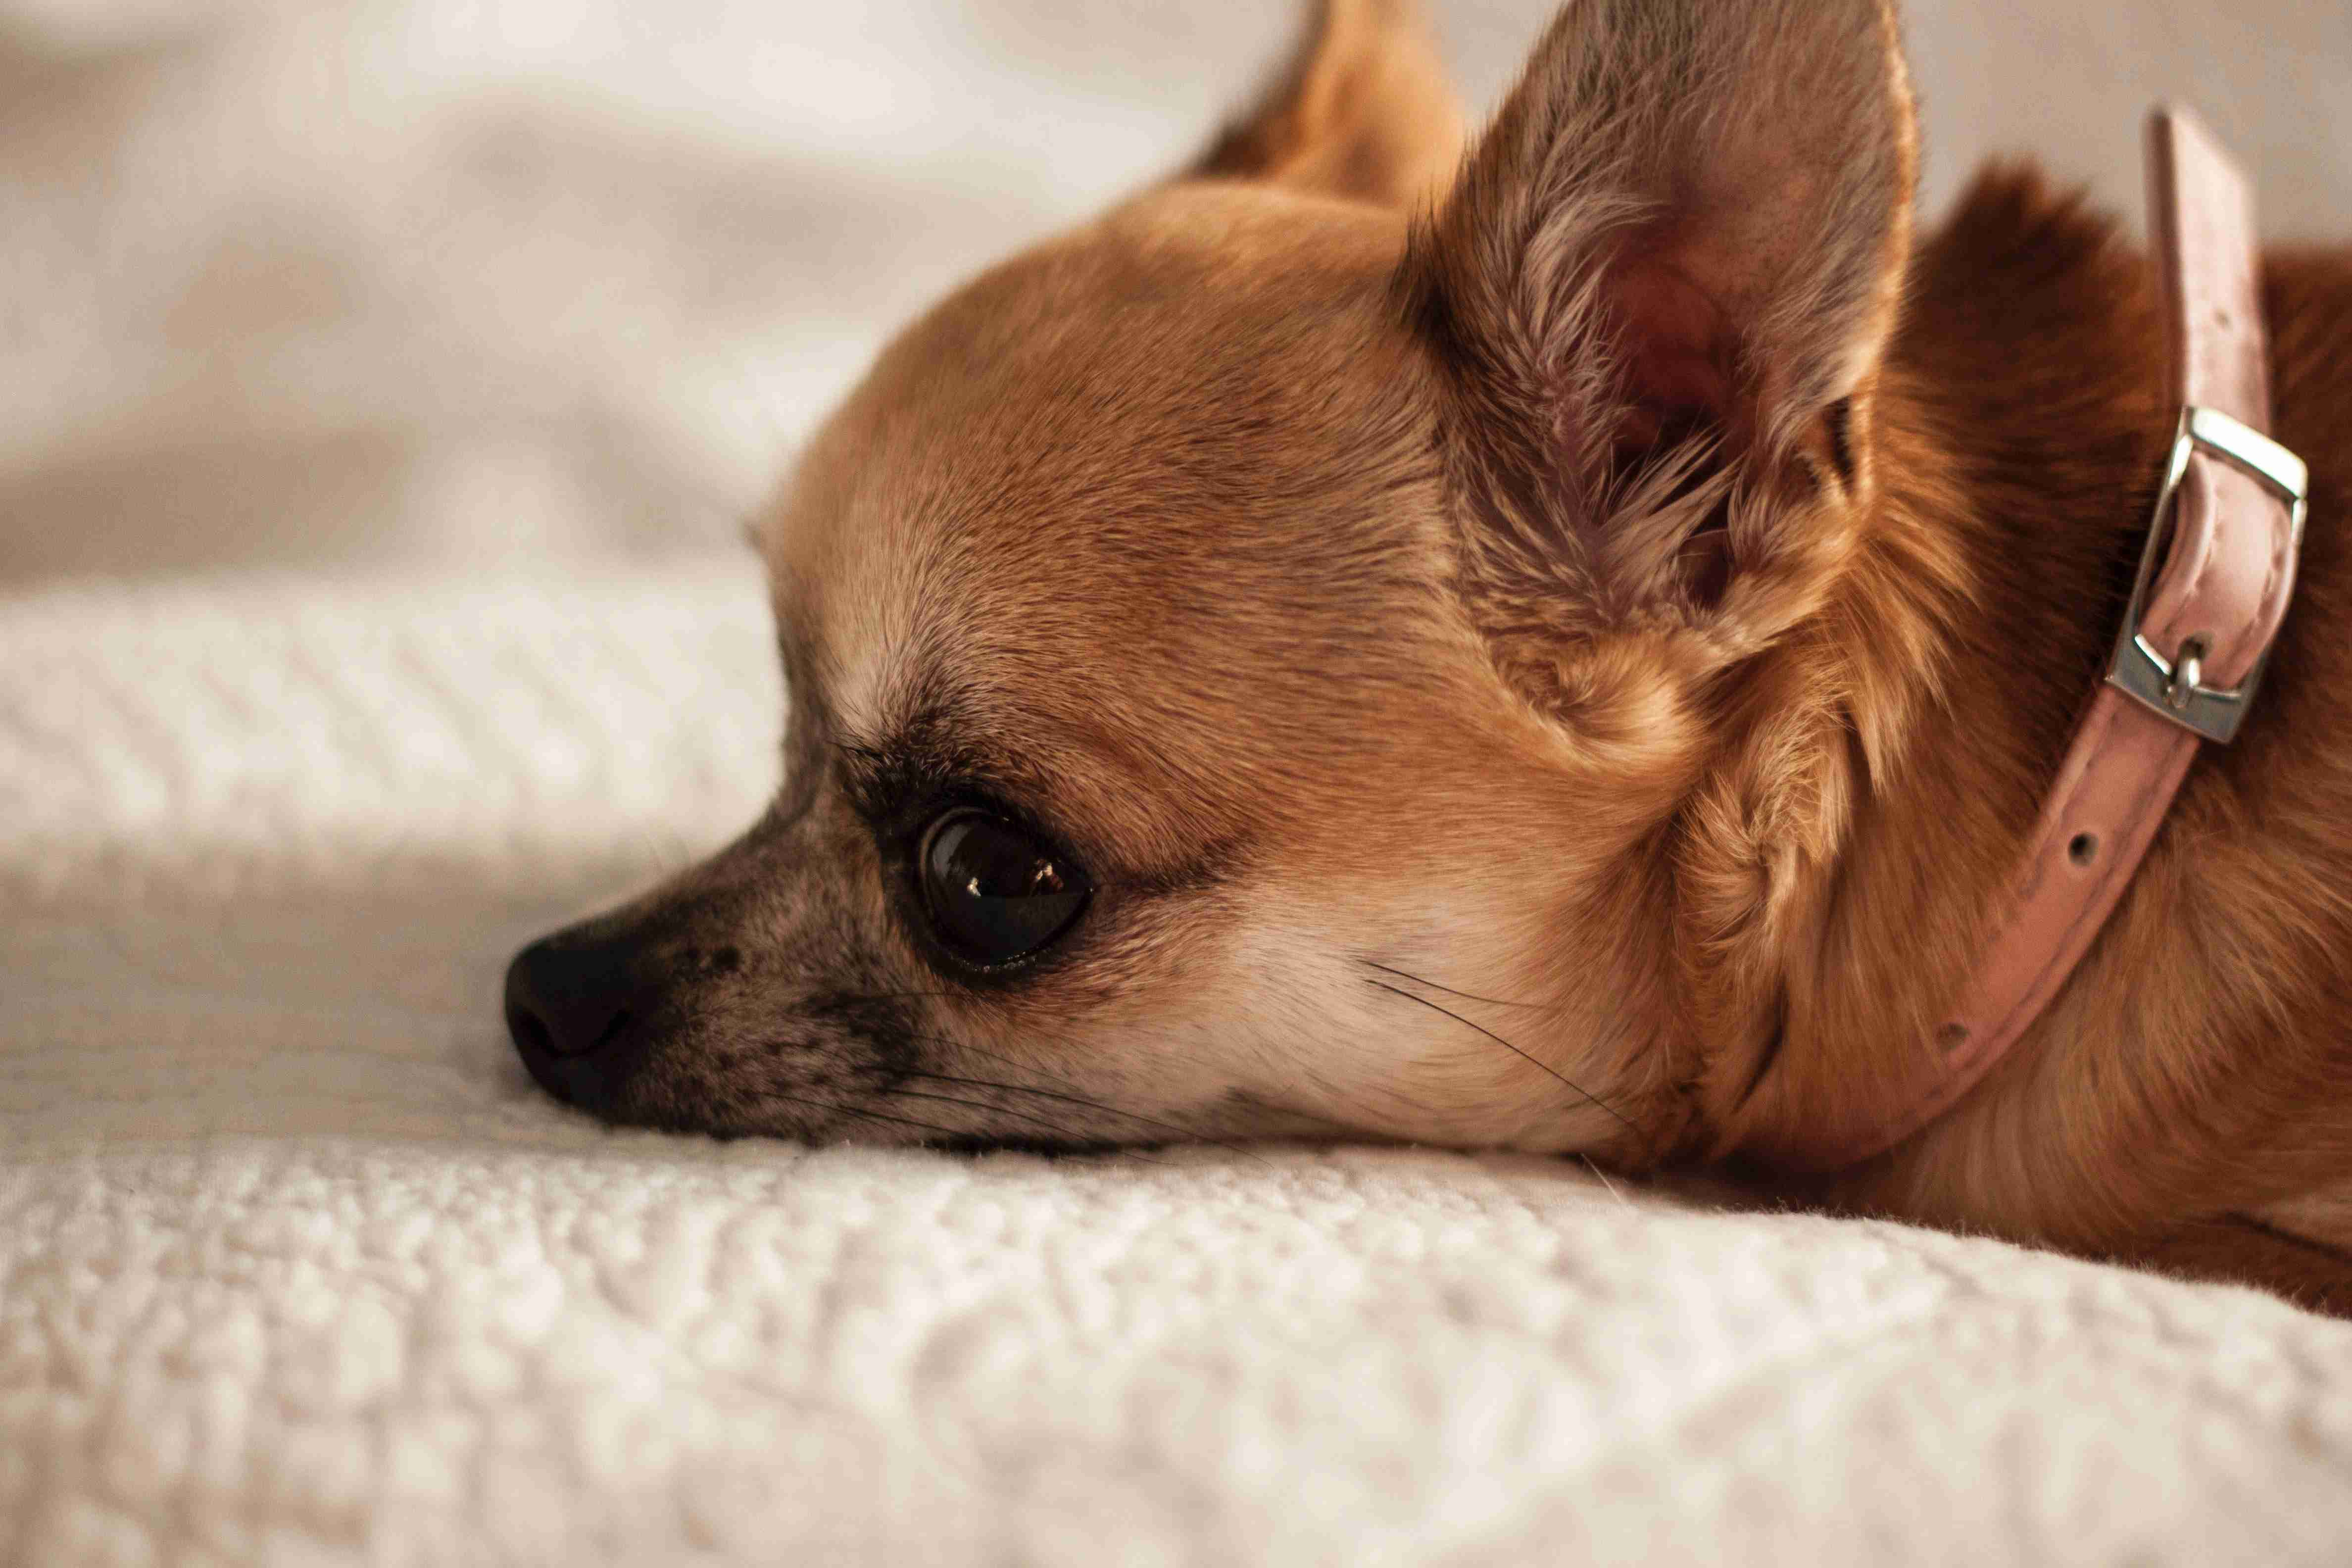 Are there any specific toys or activities that can help a Chihuahua release built-up anger?